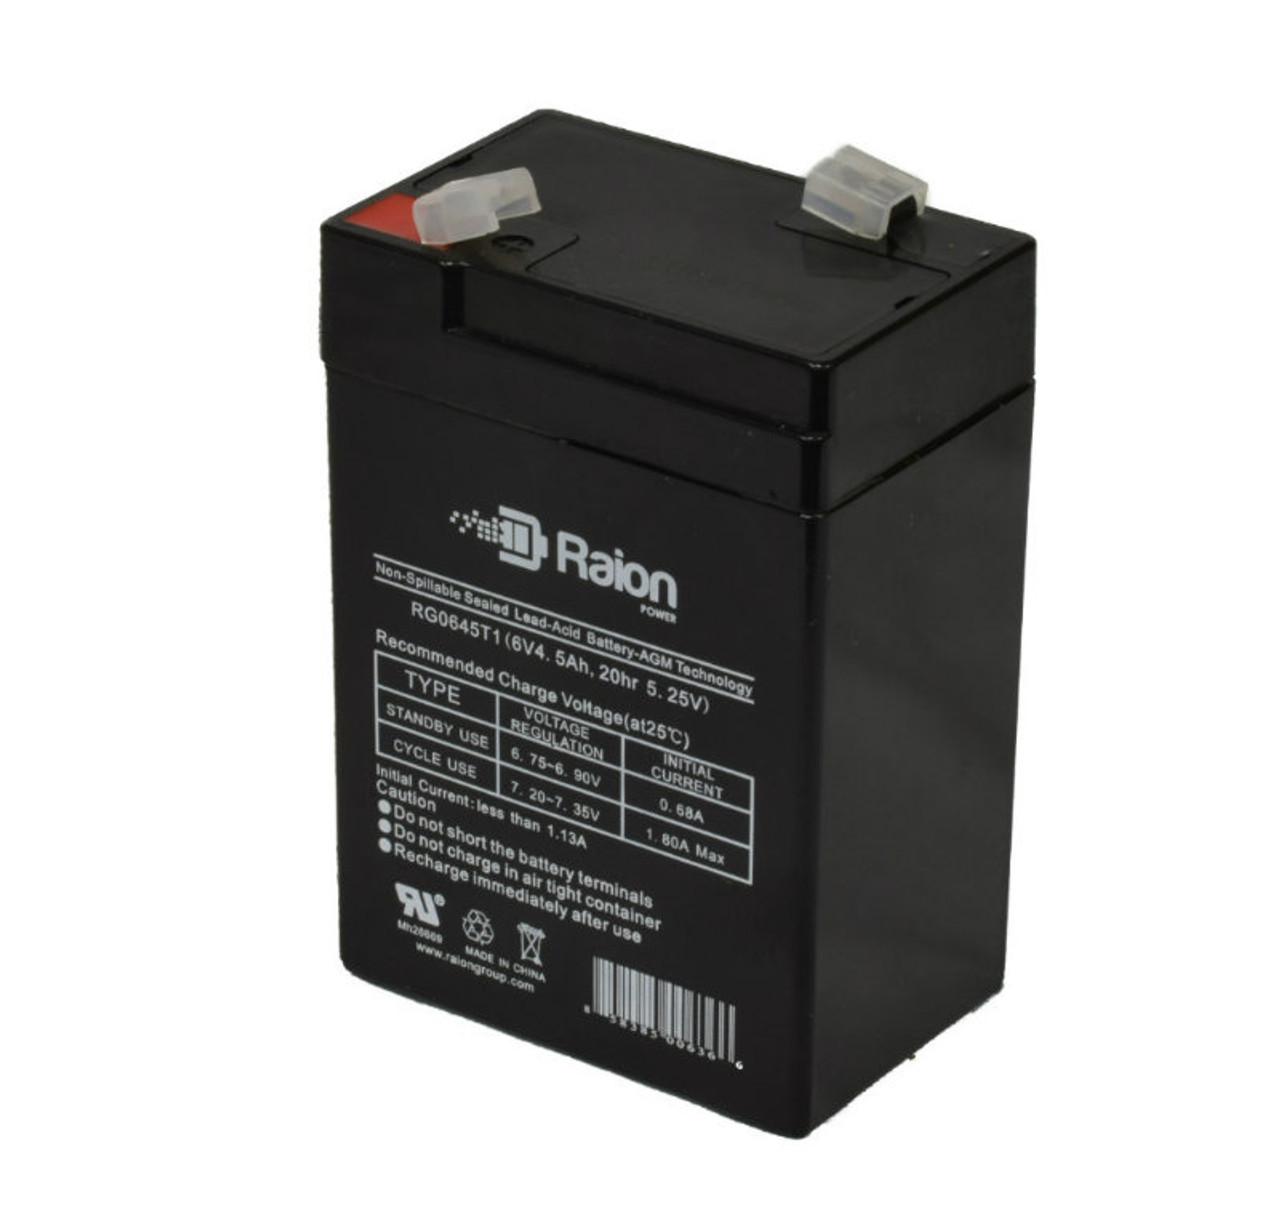 Raion Power RG0645T1 6V 4.5Ah Replacement Battery Cartridge for MUST FC6-5CUT